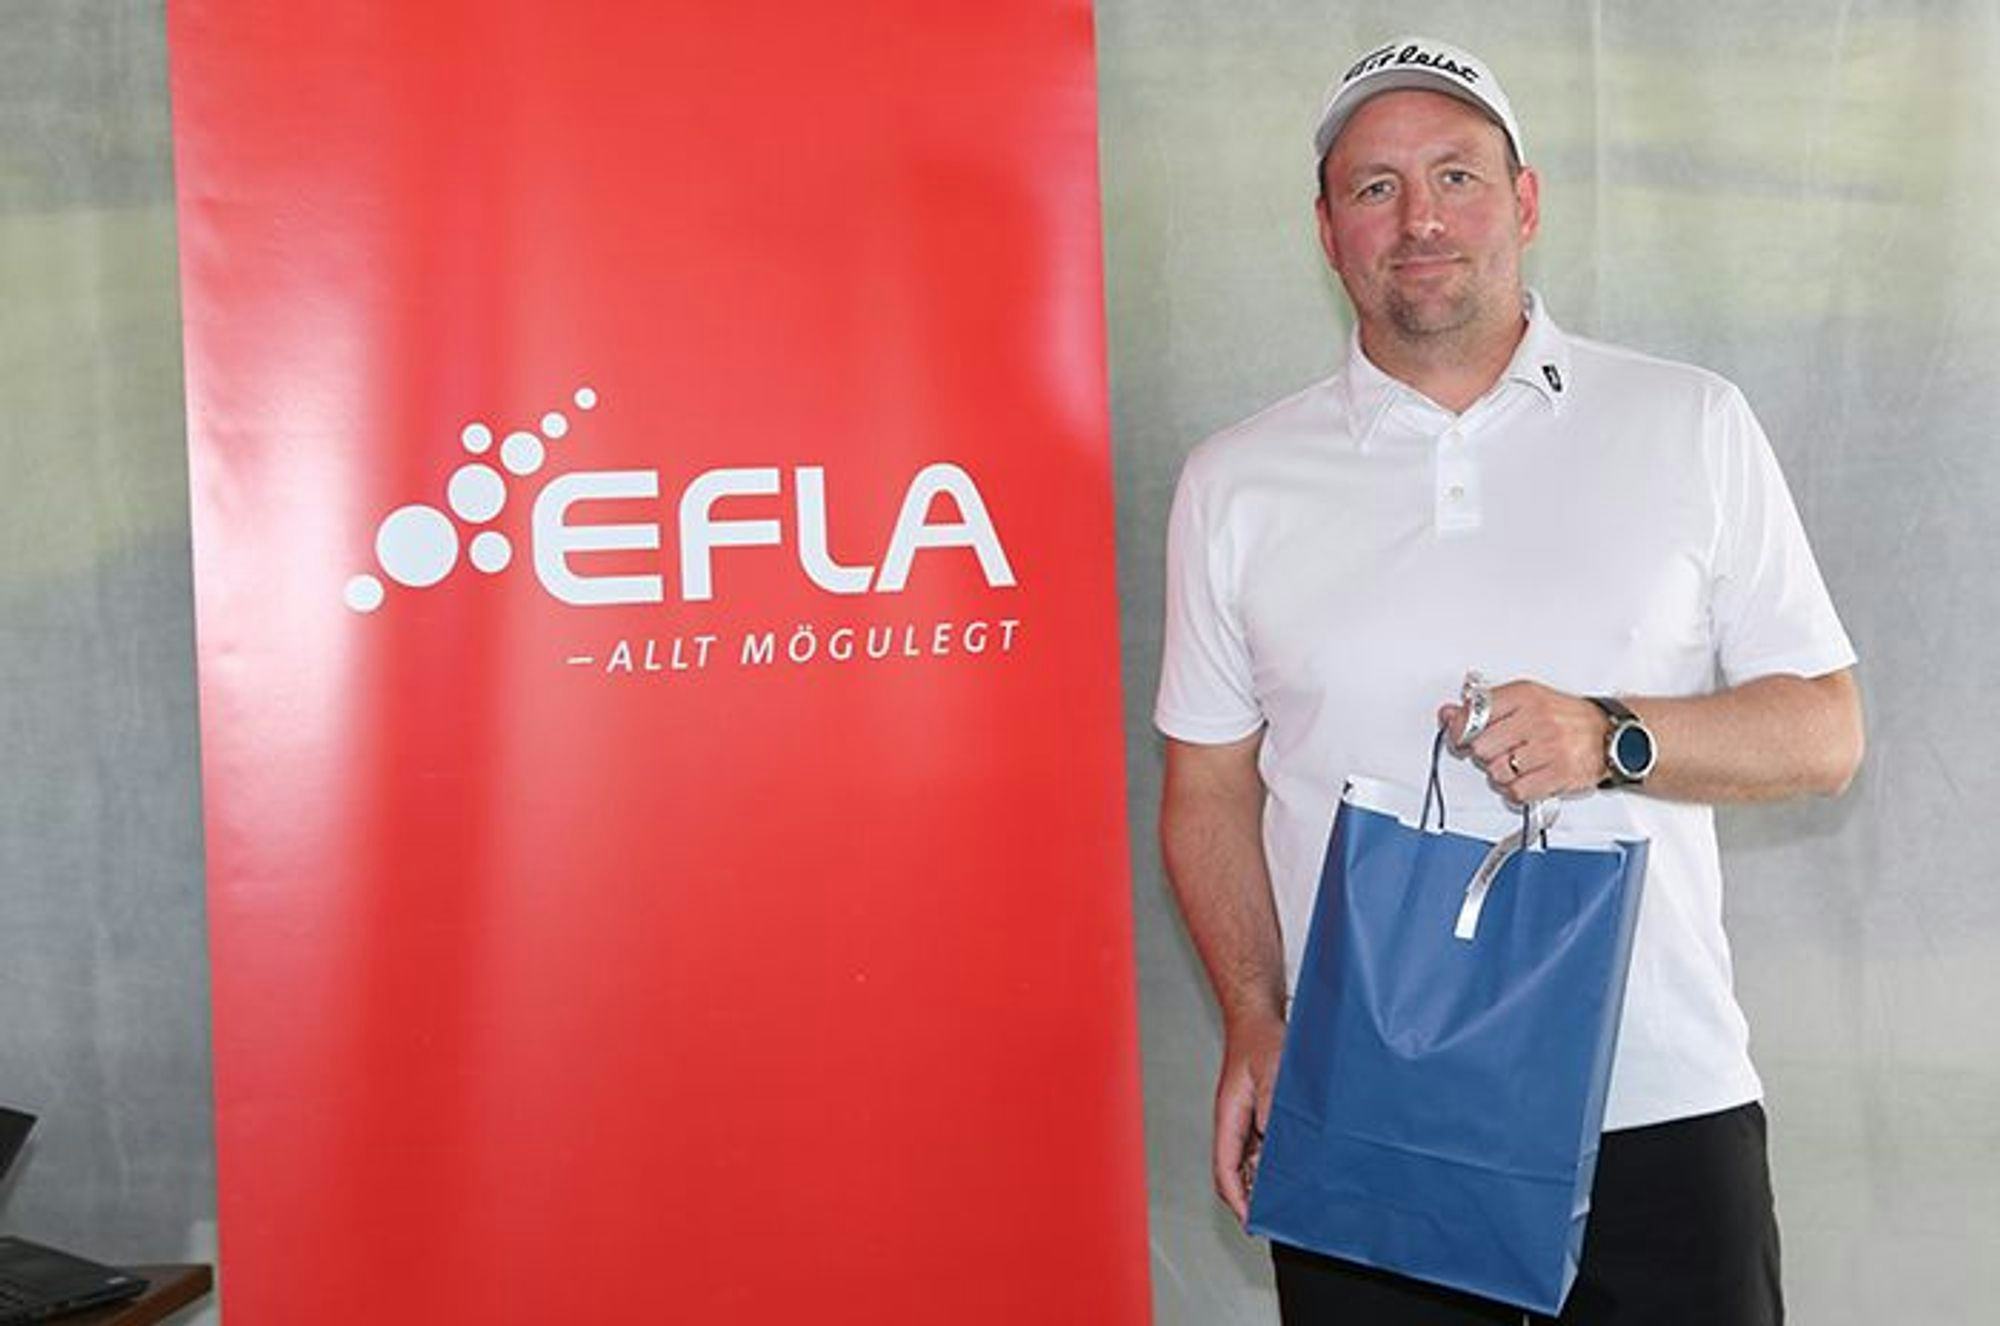 A man holding a blue bag, standing next to EFLA red promotional banner